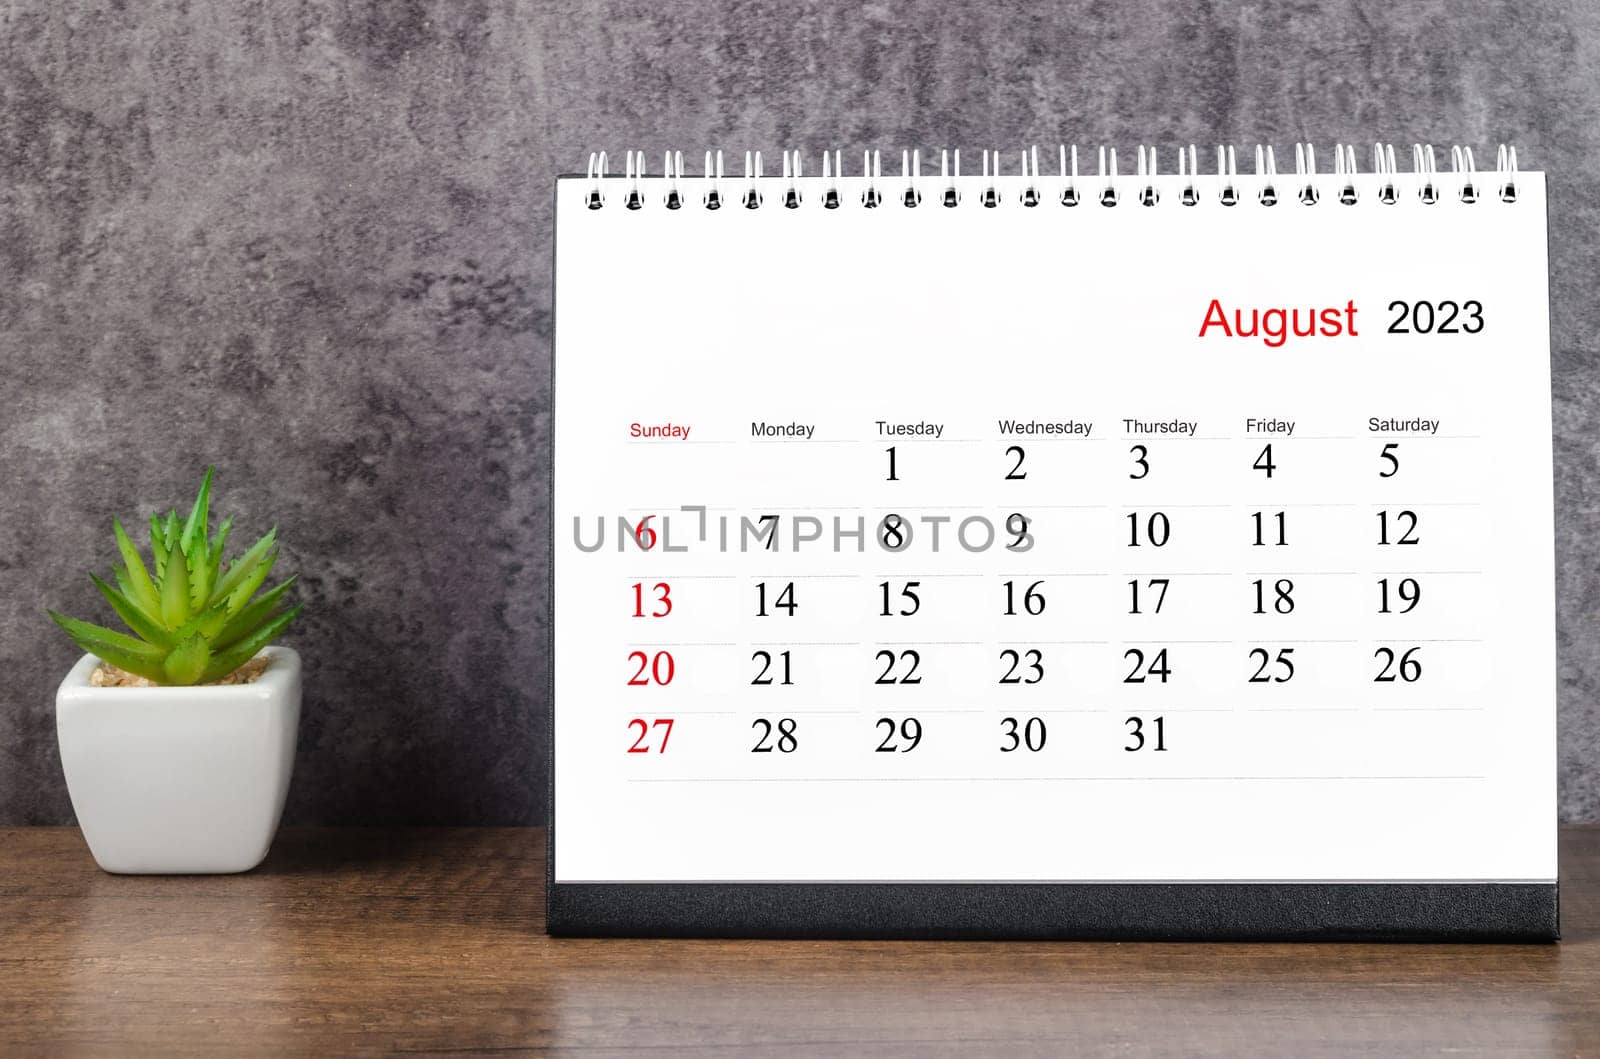 The August 2023 Monthly desk calendar for 2023 year on wooden table. by Gamjai